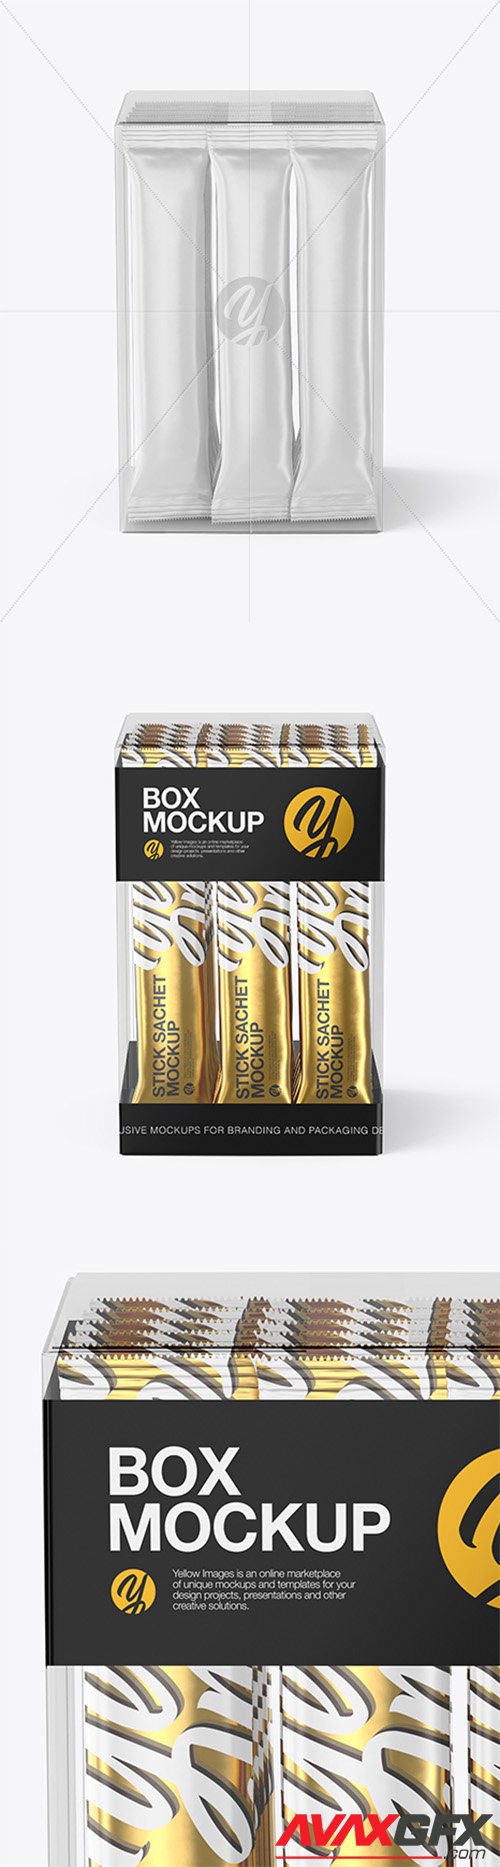 Download Box W 18 Sachets Mockup 37136 Avaxgfx All Downloads That You Need In One Place Graphic From Nitroflare Rapidgator PSD Mockup Templates